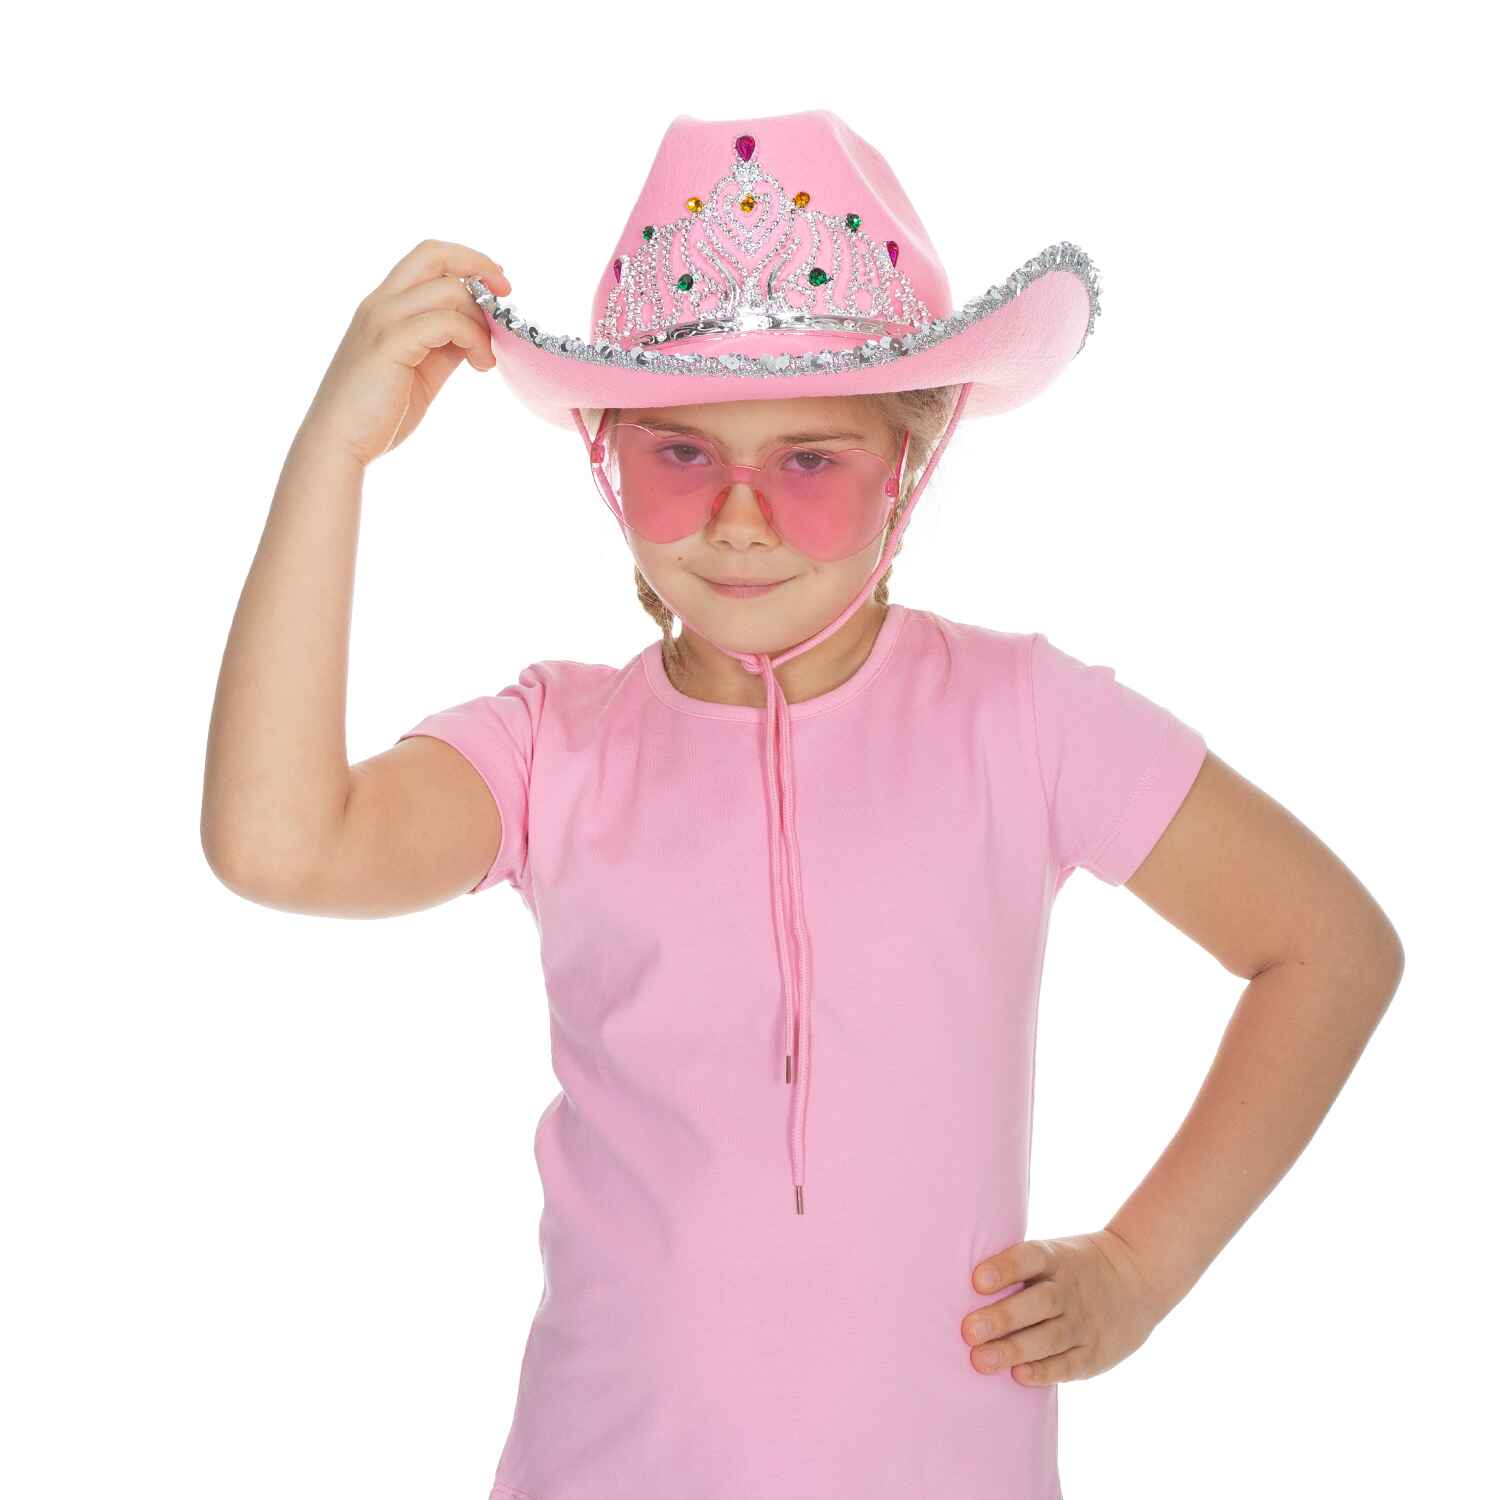 Halloween Cow Girl Costume Accessories - Fun Rodeo Party Hats and Goggles for Kids, Girls and Women